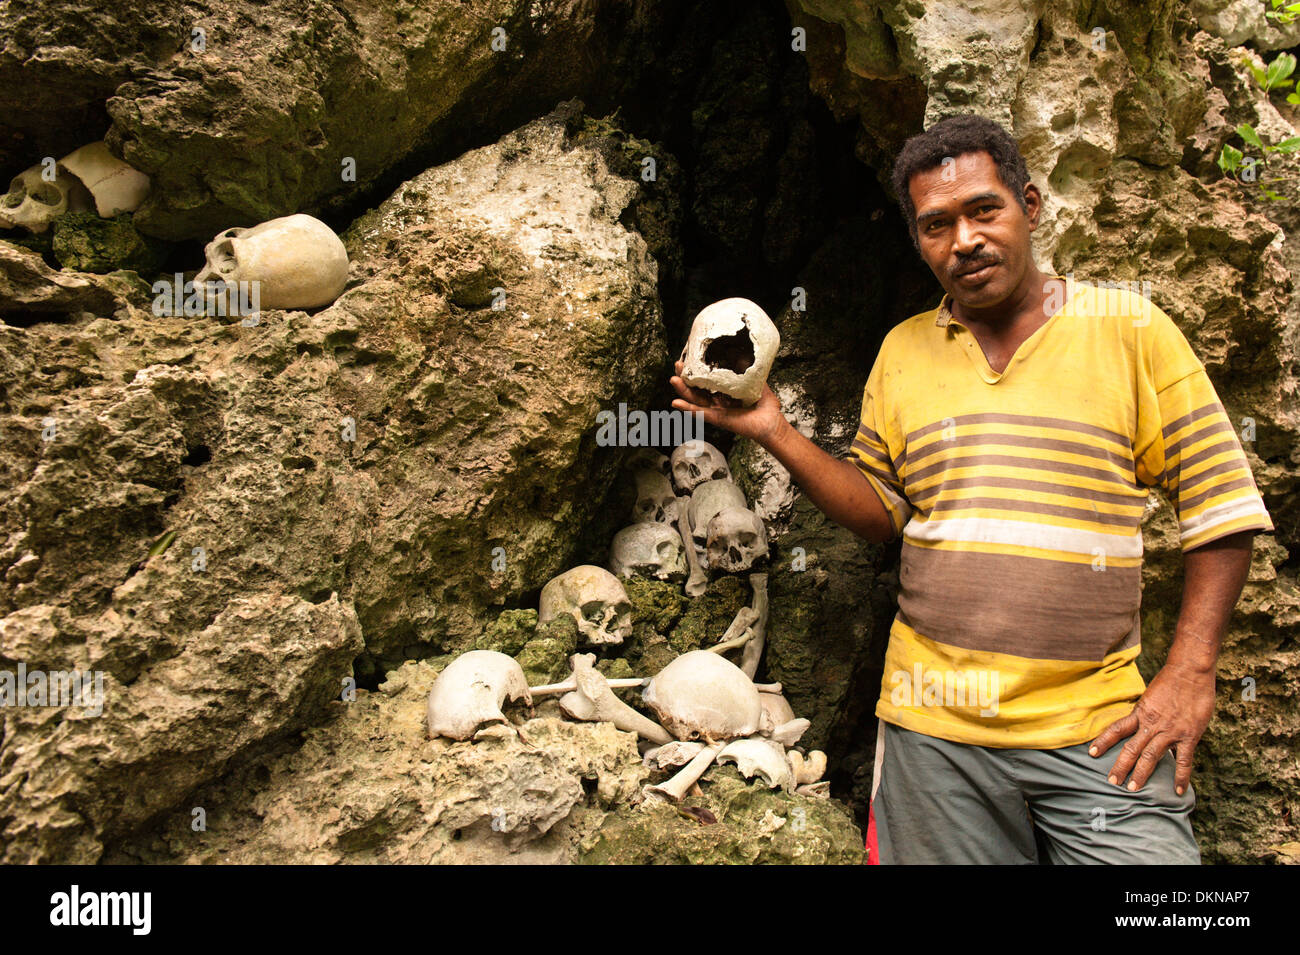 Man holding skull amongst human remains he said were from enemies killed and eaten by his ancestors, renowned warriors. Fiji Stock Photo